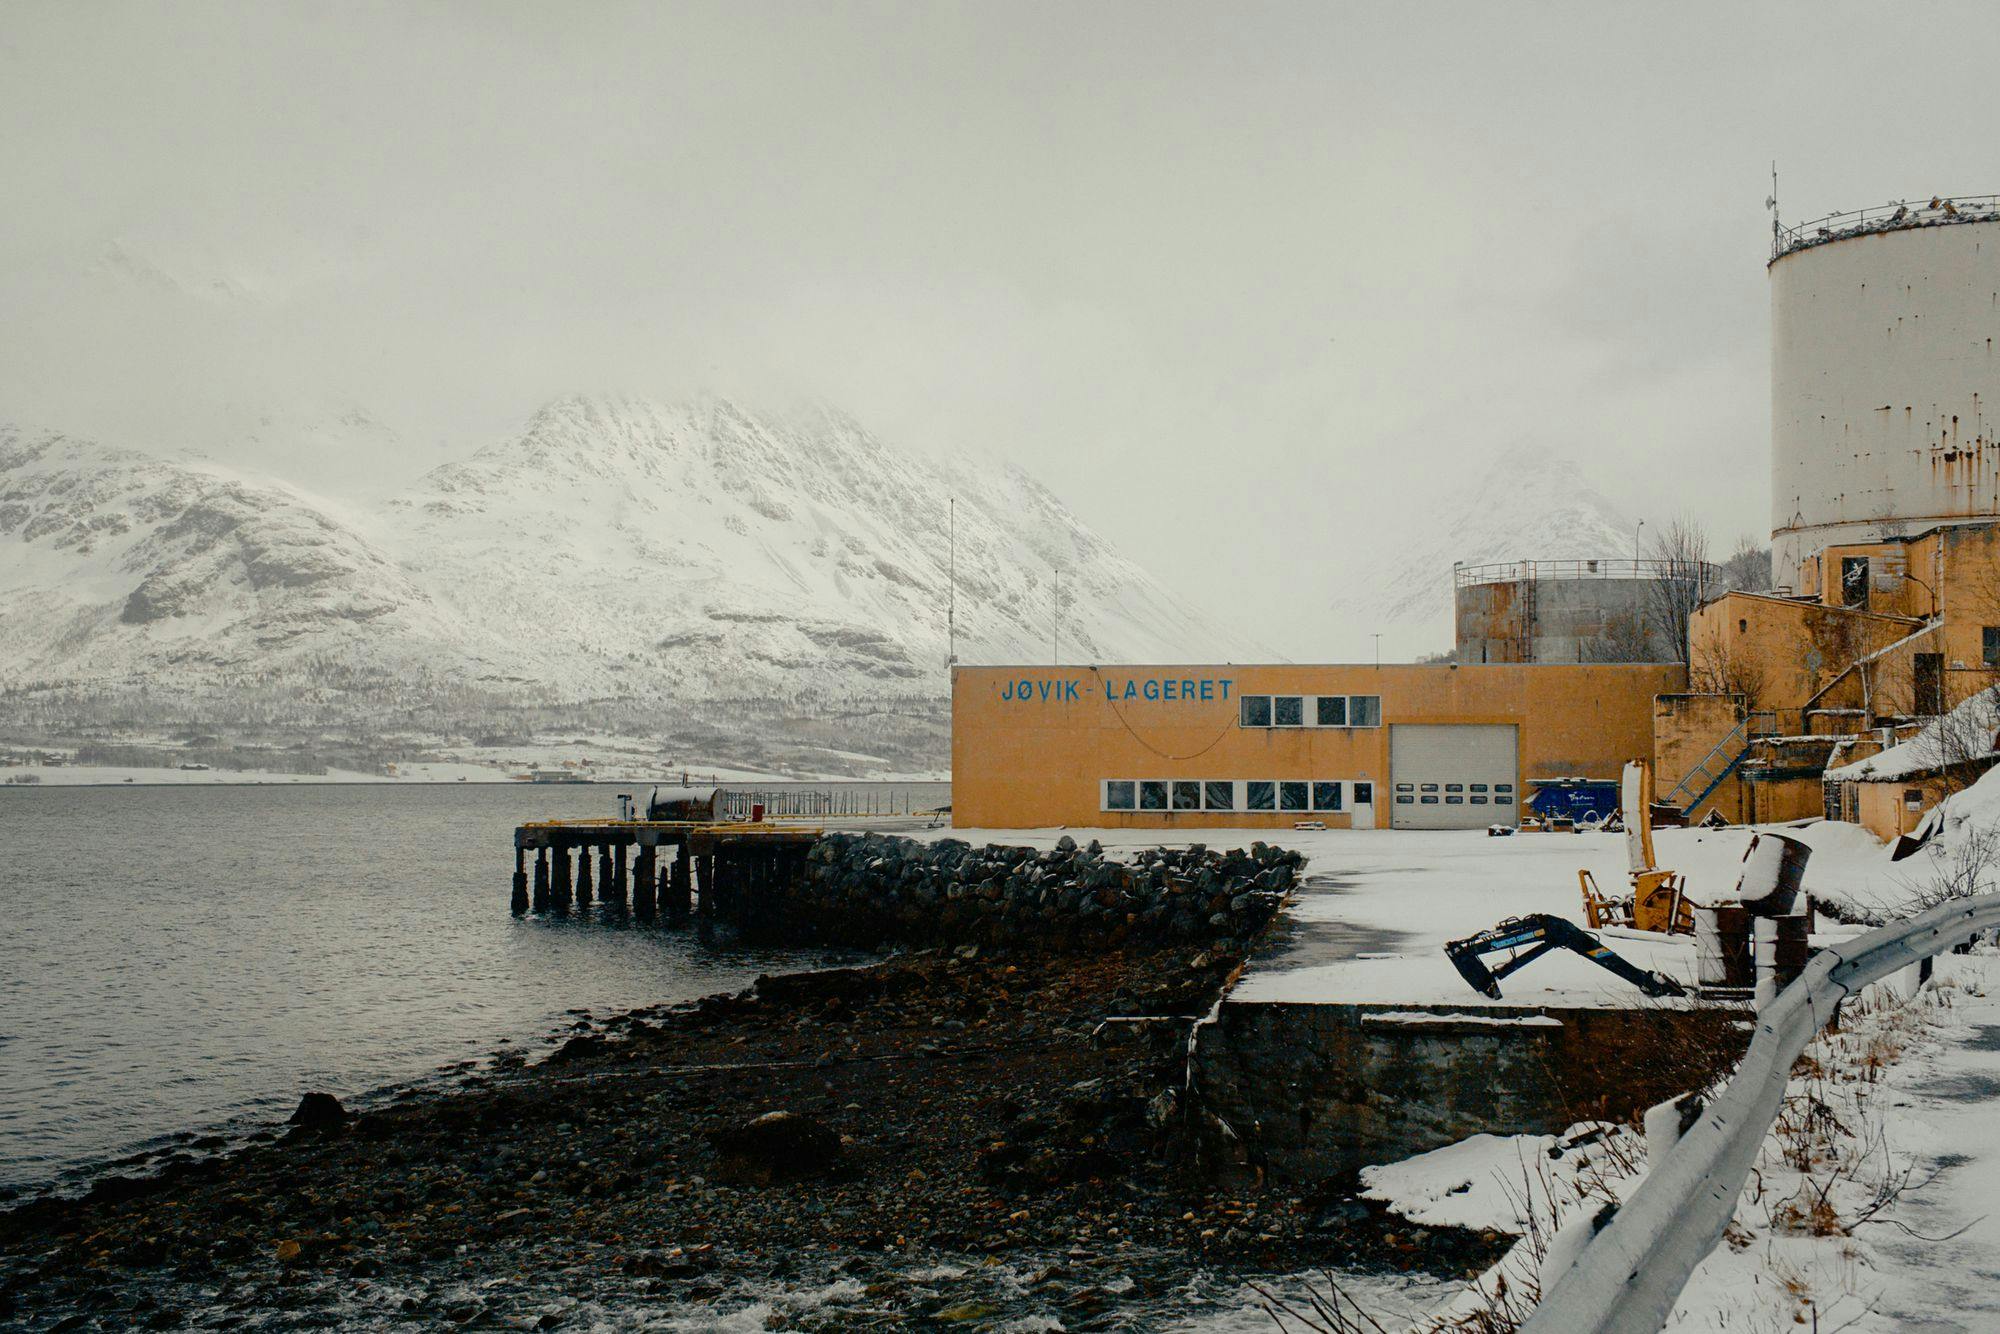 A decrepit industrial facility next to a fjord